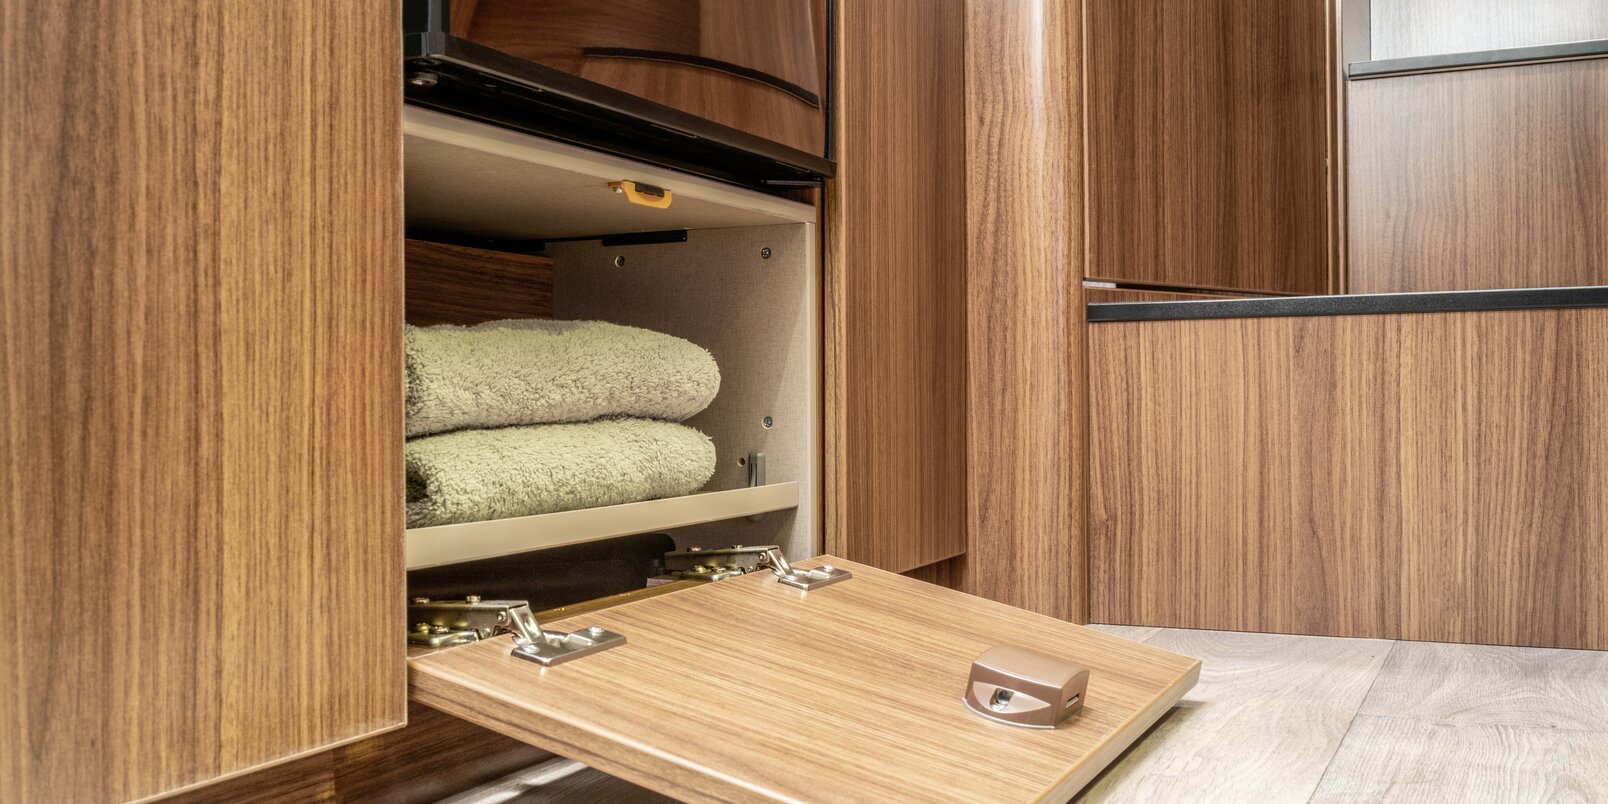 Small storage compartment filled with towels below the refrigerator in the HYMER ML-T 580